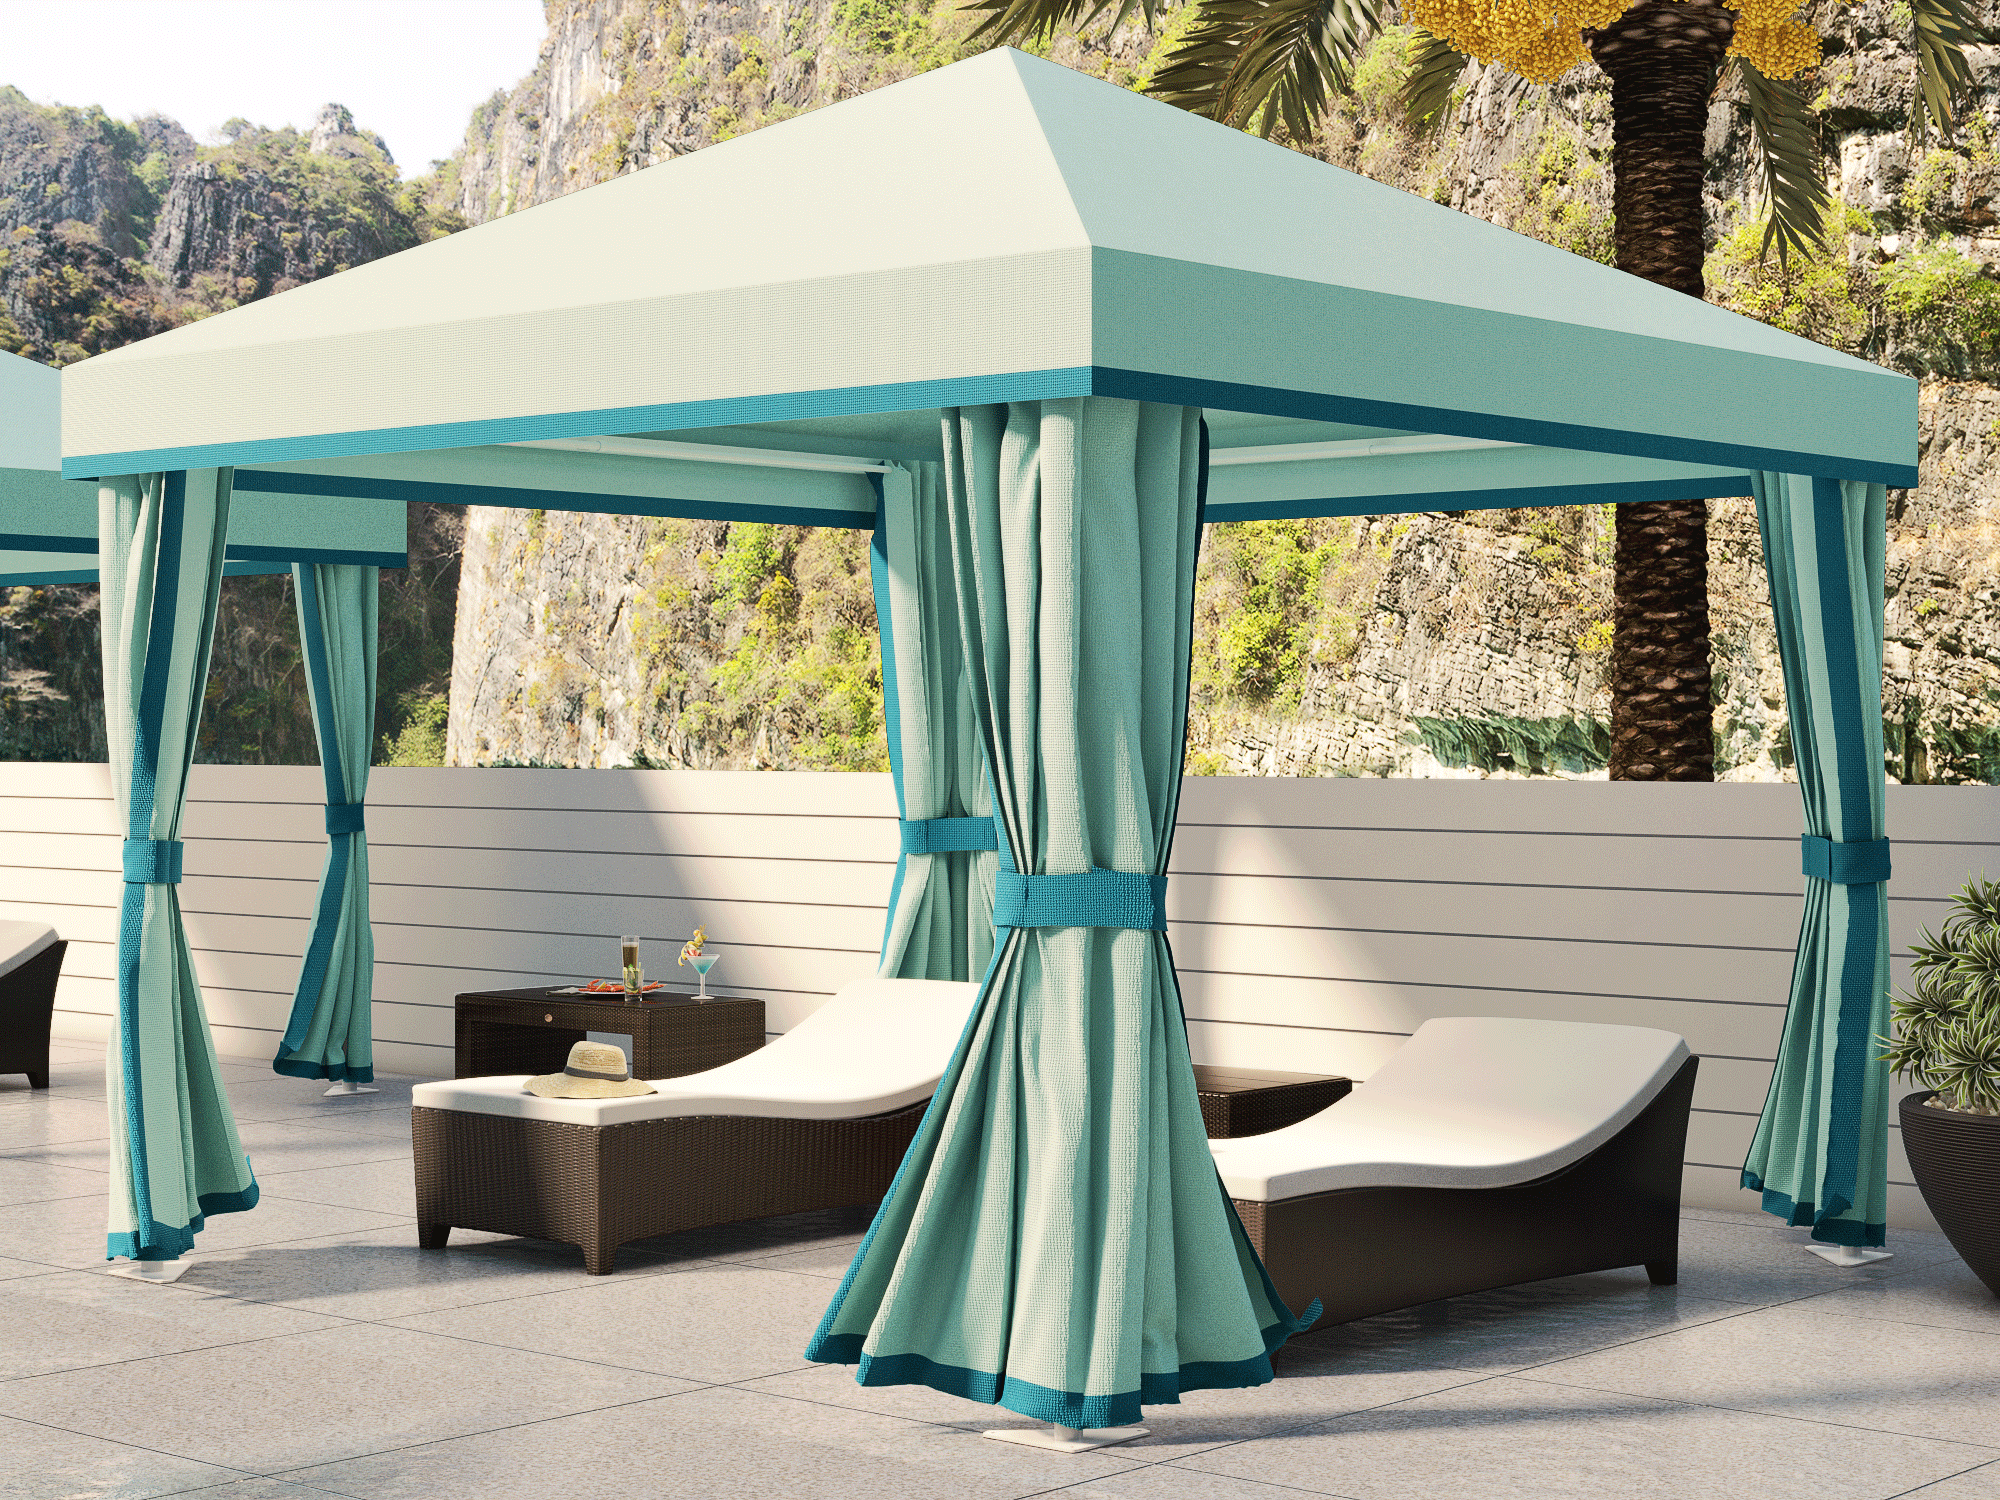 Academy Design's Presidential cabana, another perspective view, highlighting its corrosion-resistant 6061-T6 aluminum frame and timeless design with a marine-grade fabric peaked roof featuring a hard valance. The mock curtains, made from marine-grade upholstery fabric, add sophistication while concealing the structure's hardware, making it a top choice for luxury resorts.